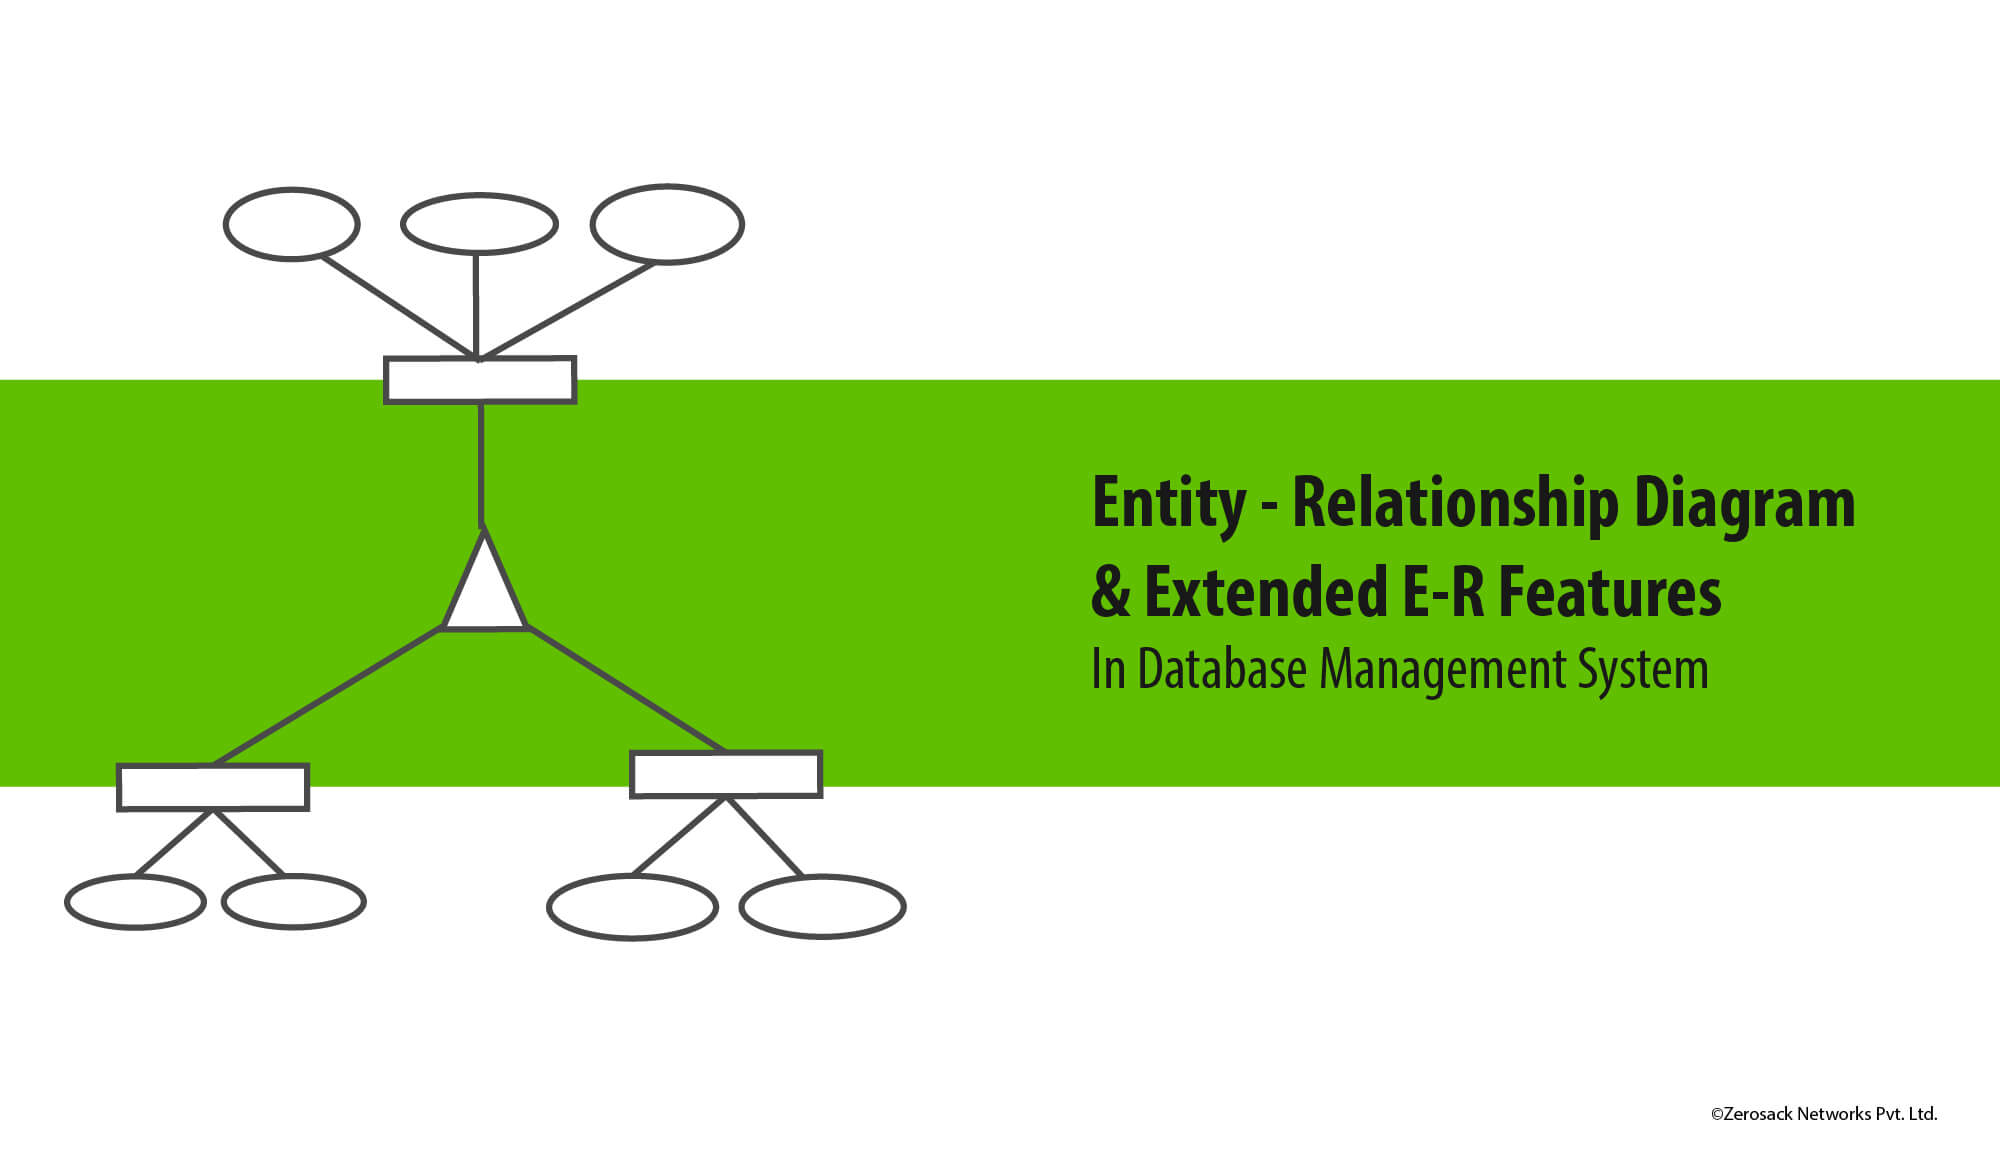 E-R Model Diagram And Extended E-R Feature In Dbms regarding Er Model Examples In Dbms